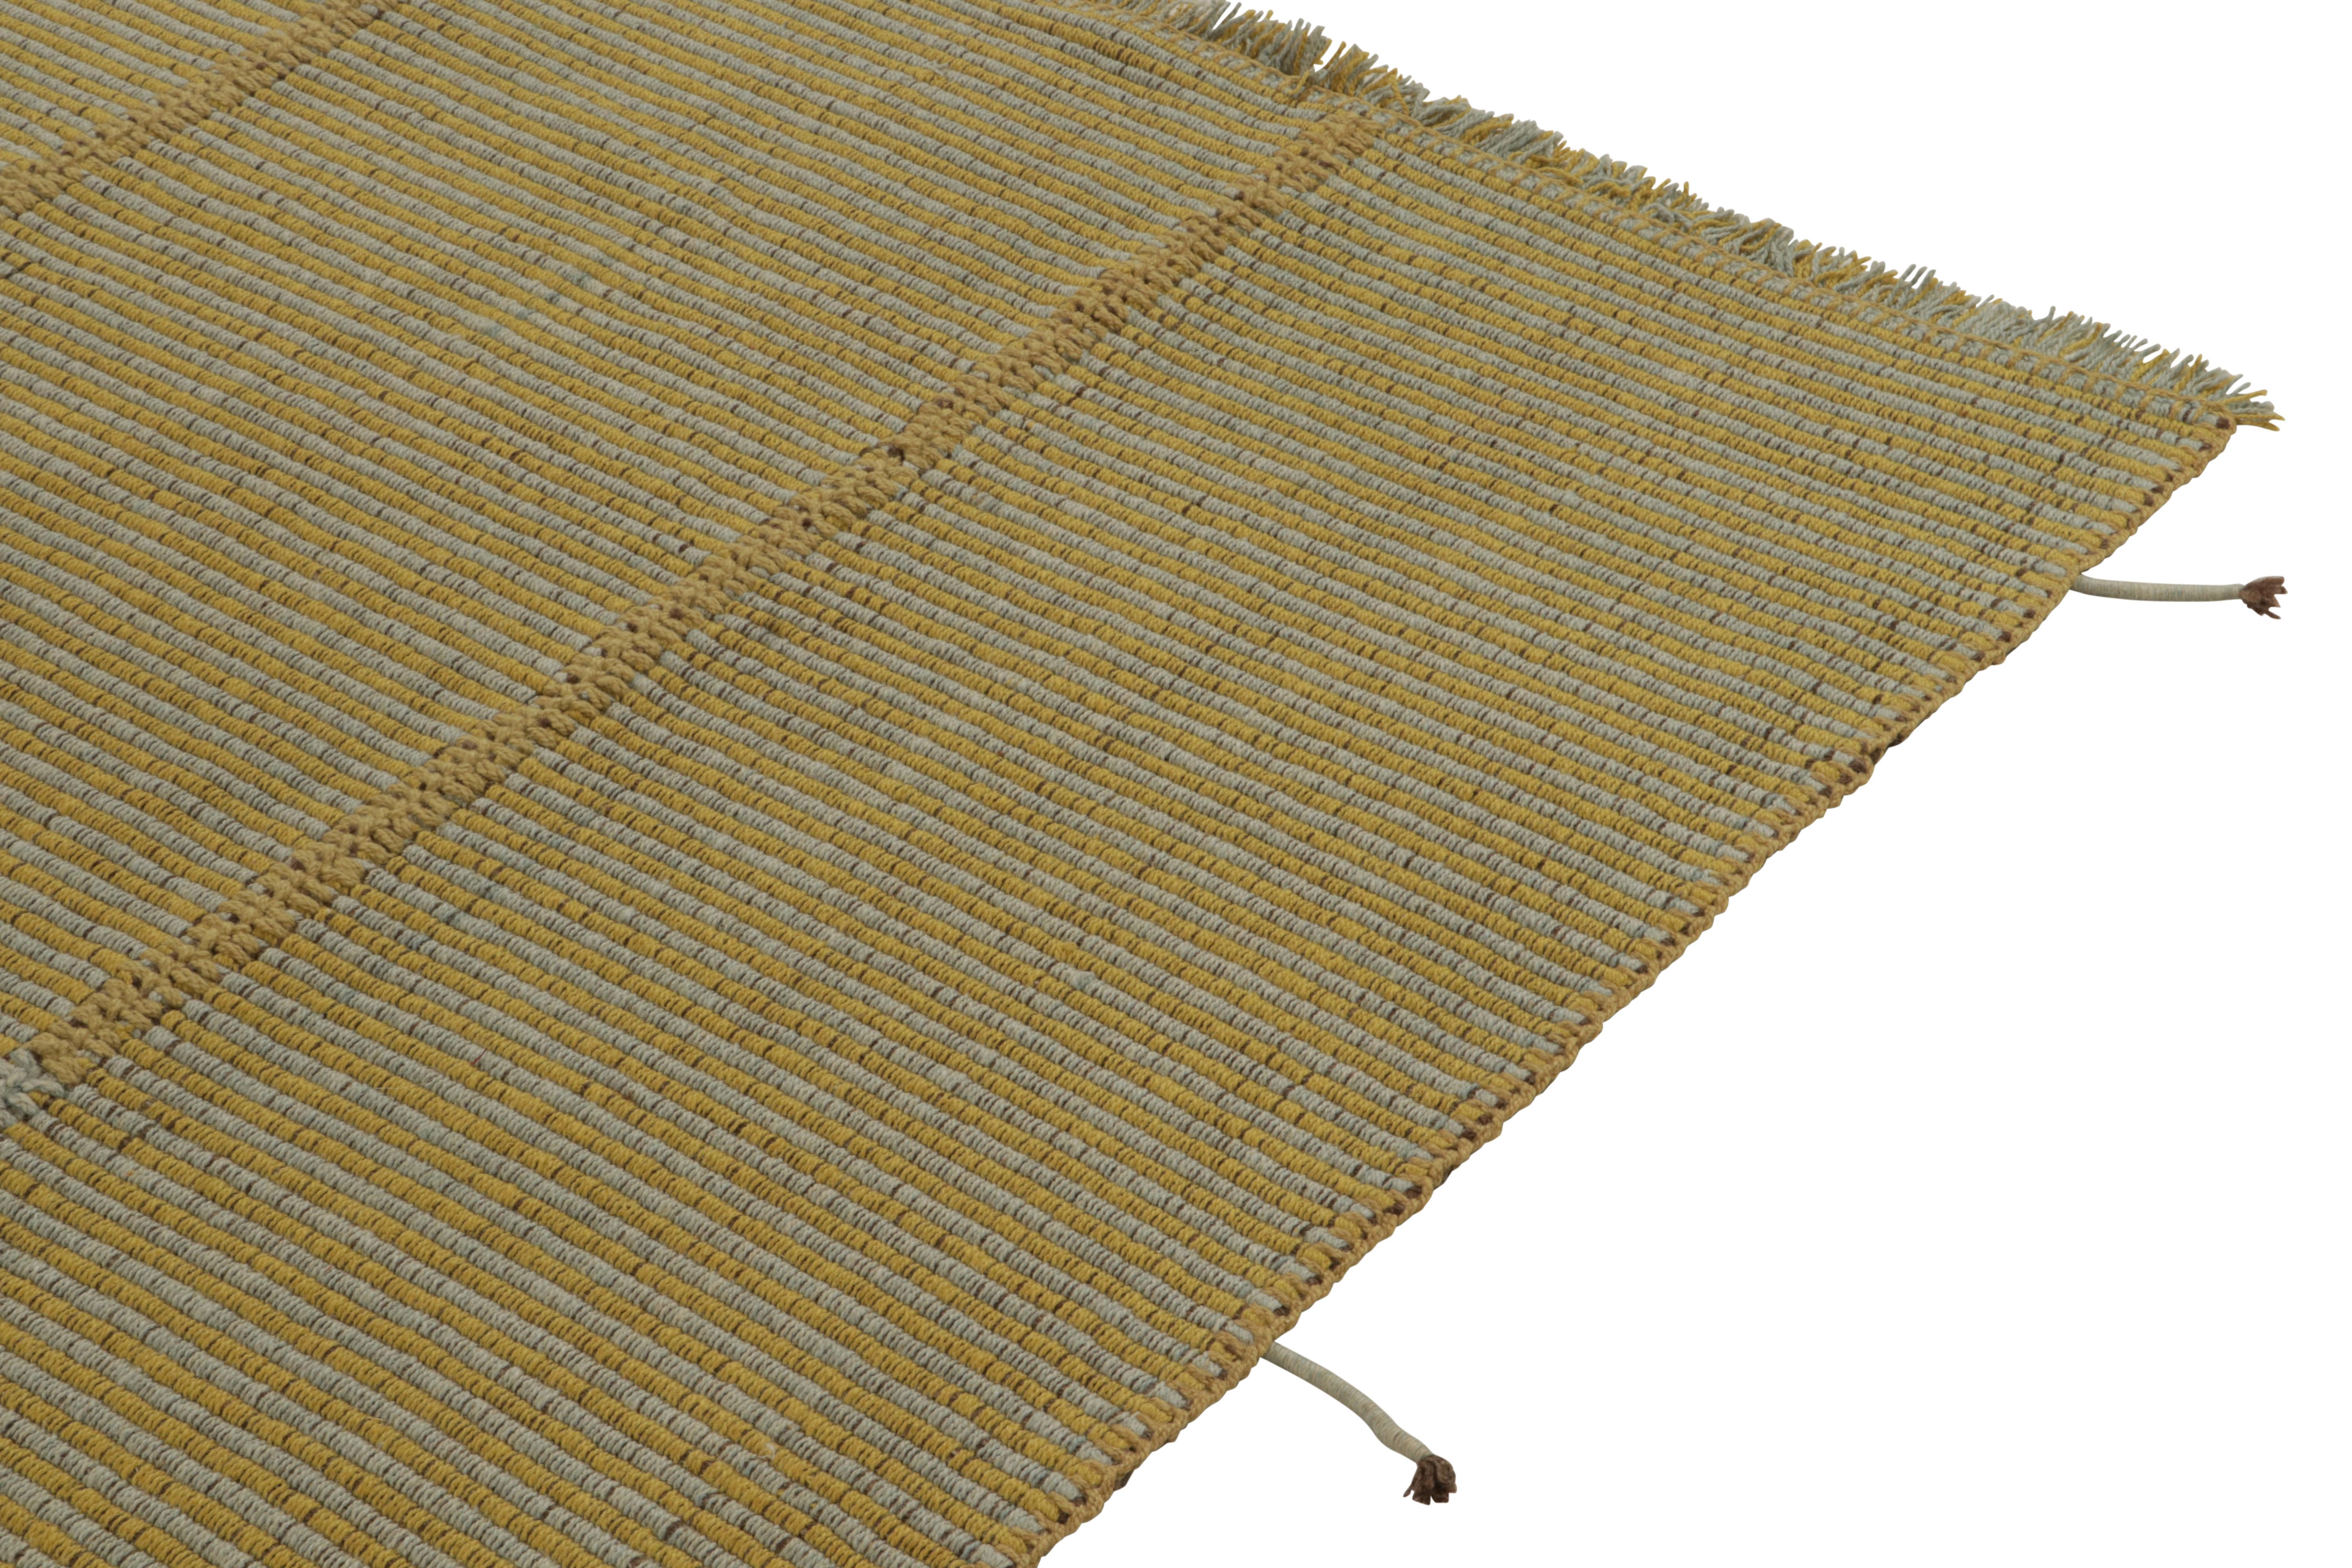 Rug & Kilim’s Contemporary Kilim in Golden-Yellow with Blue Stripes & Accents In New Condition For Sale In Long Island City, NY